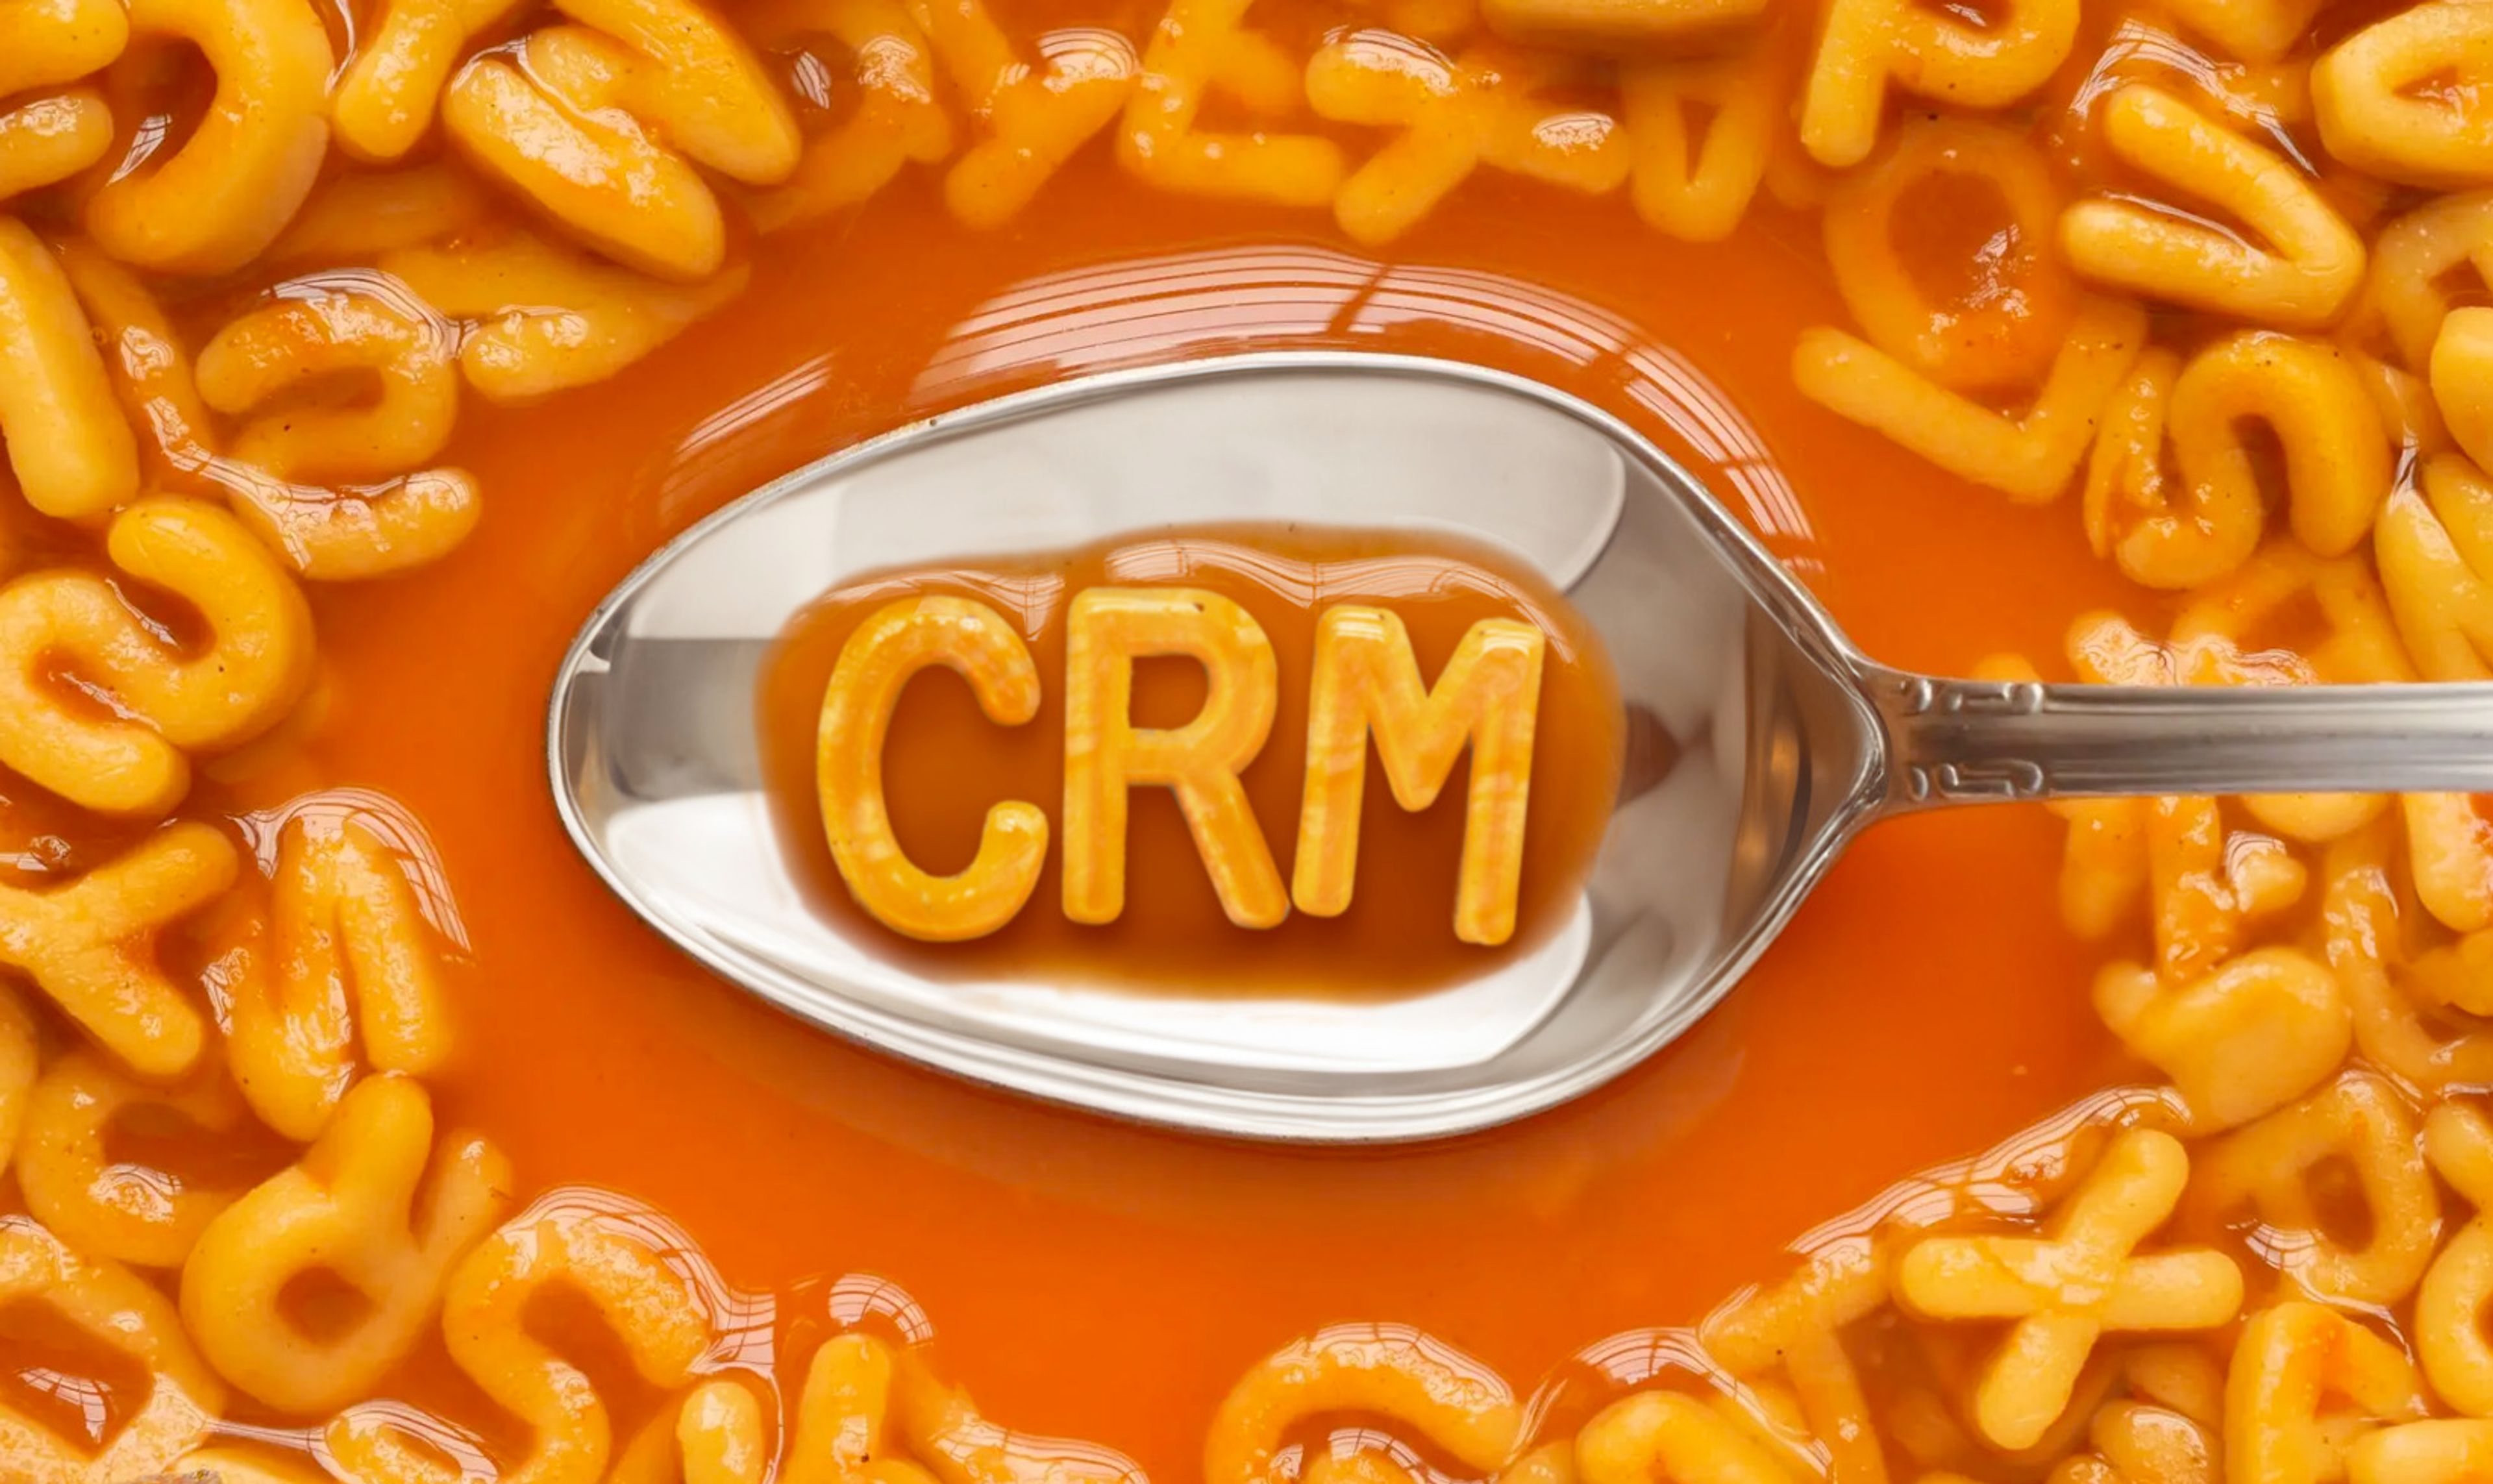 Alphabet soup with a spoon containing noodles in the shape of letters reading "CRM"